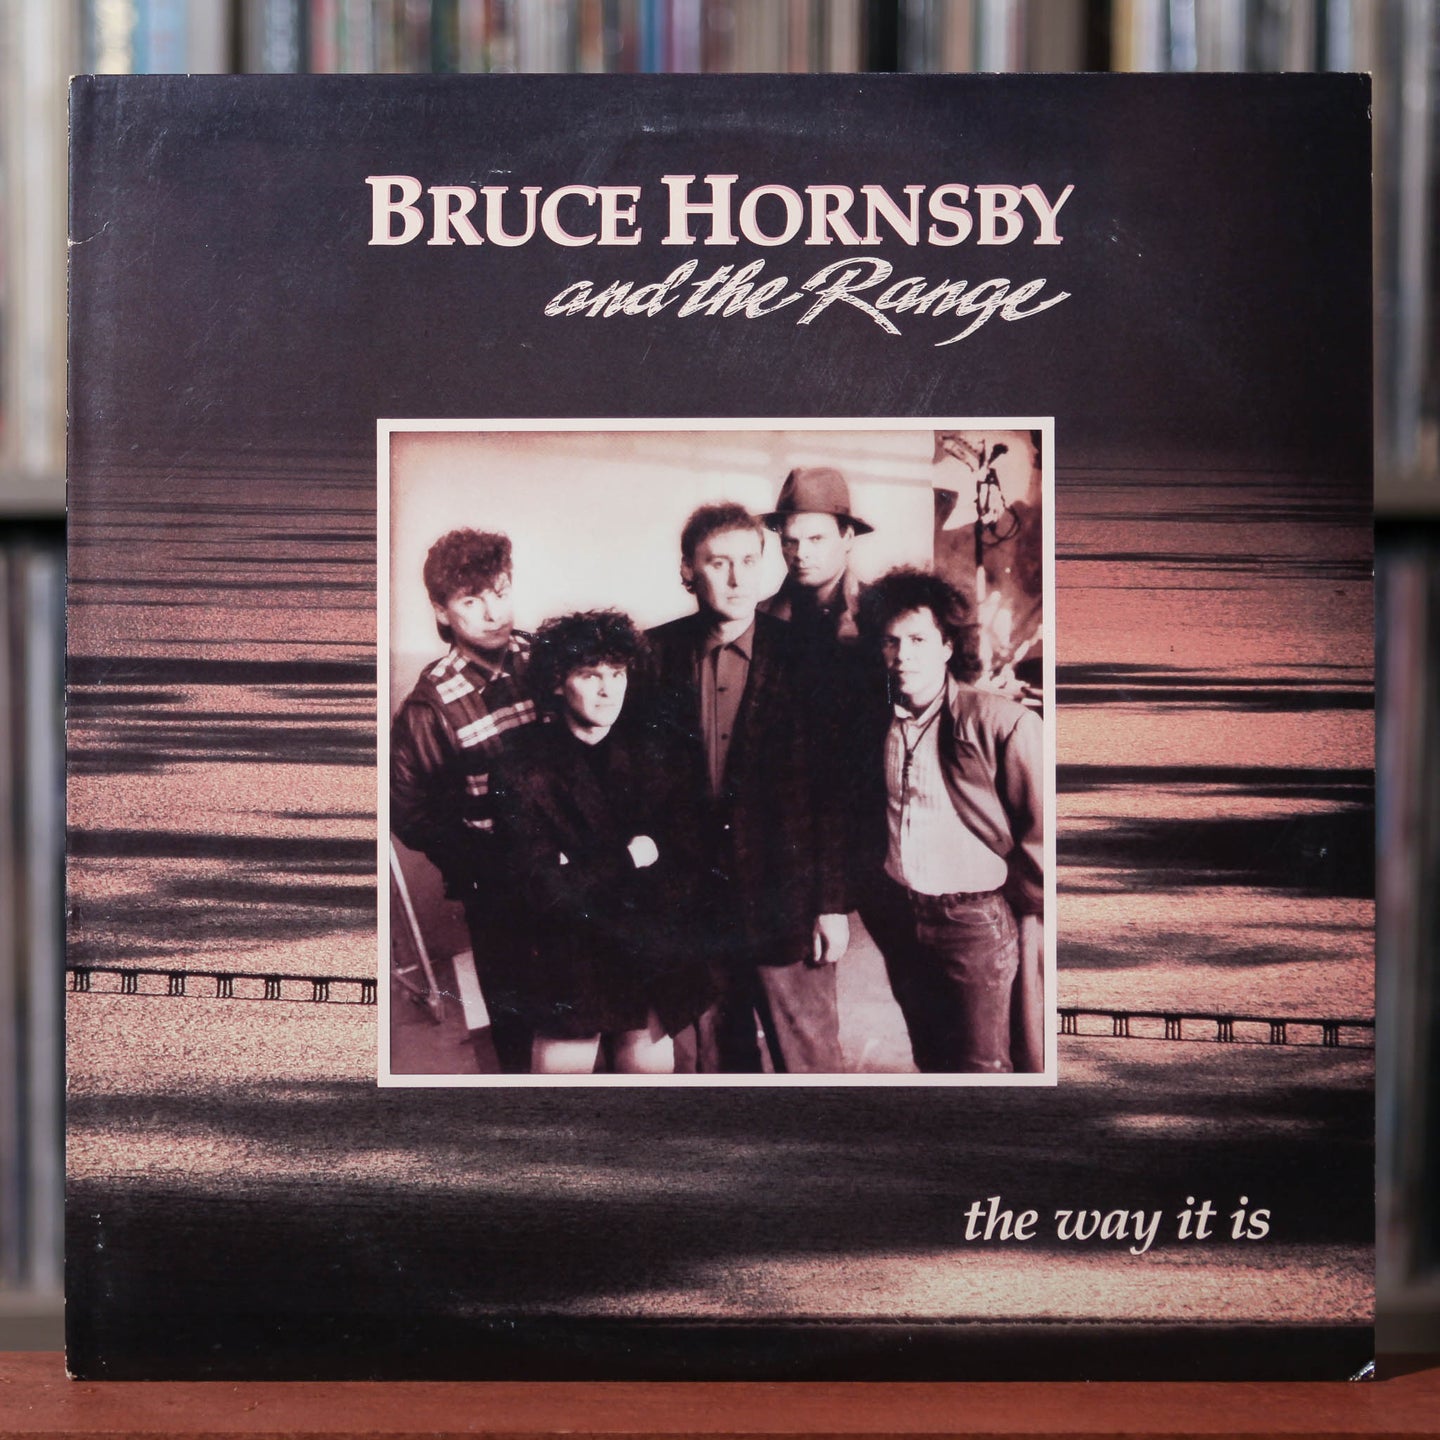 Bruce Hornsby And The Range - The Way It Is - 1986 RCA Victor, VG+/VG+